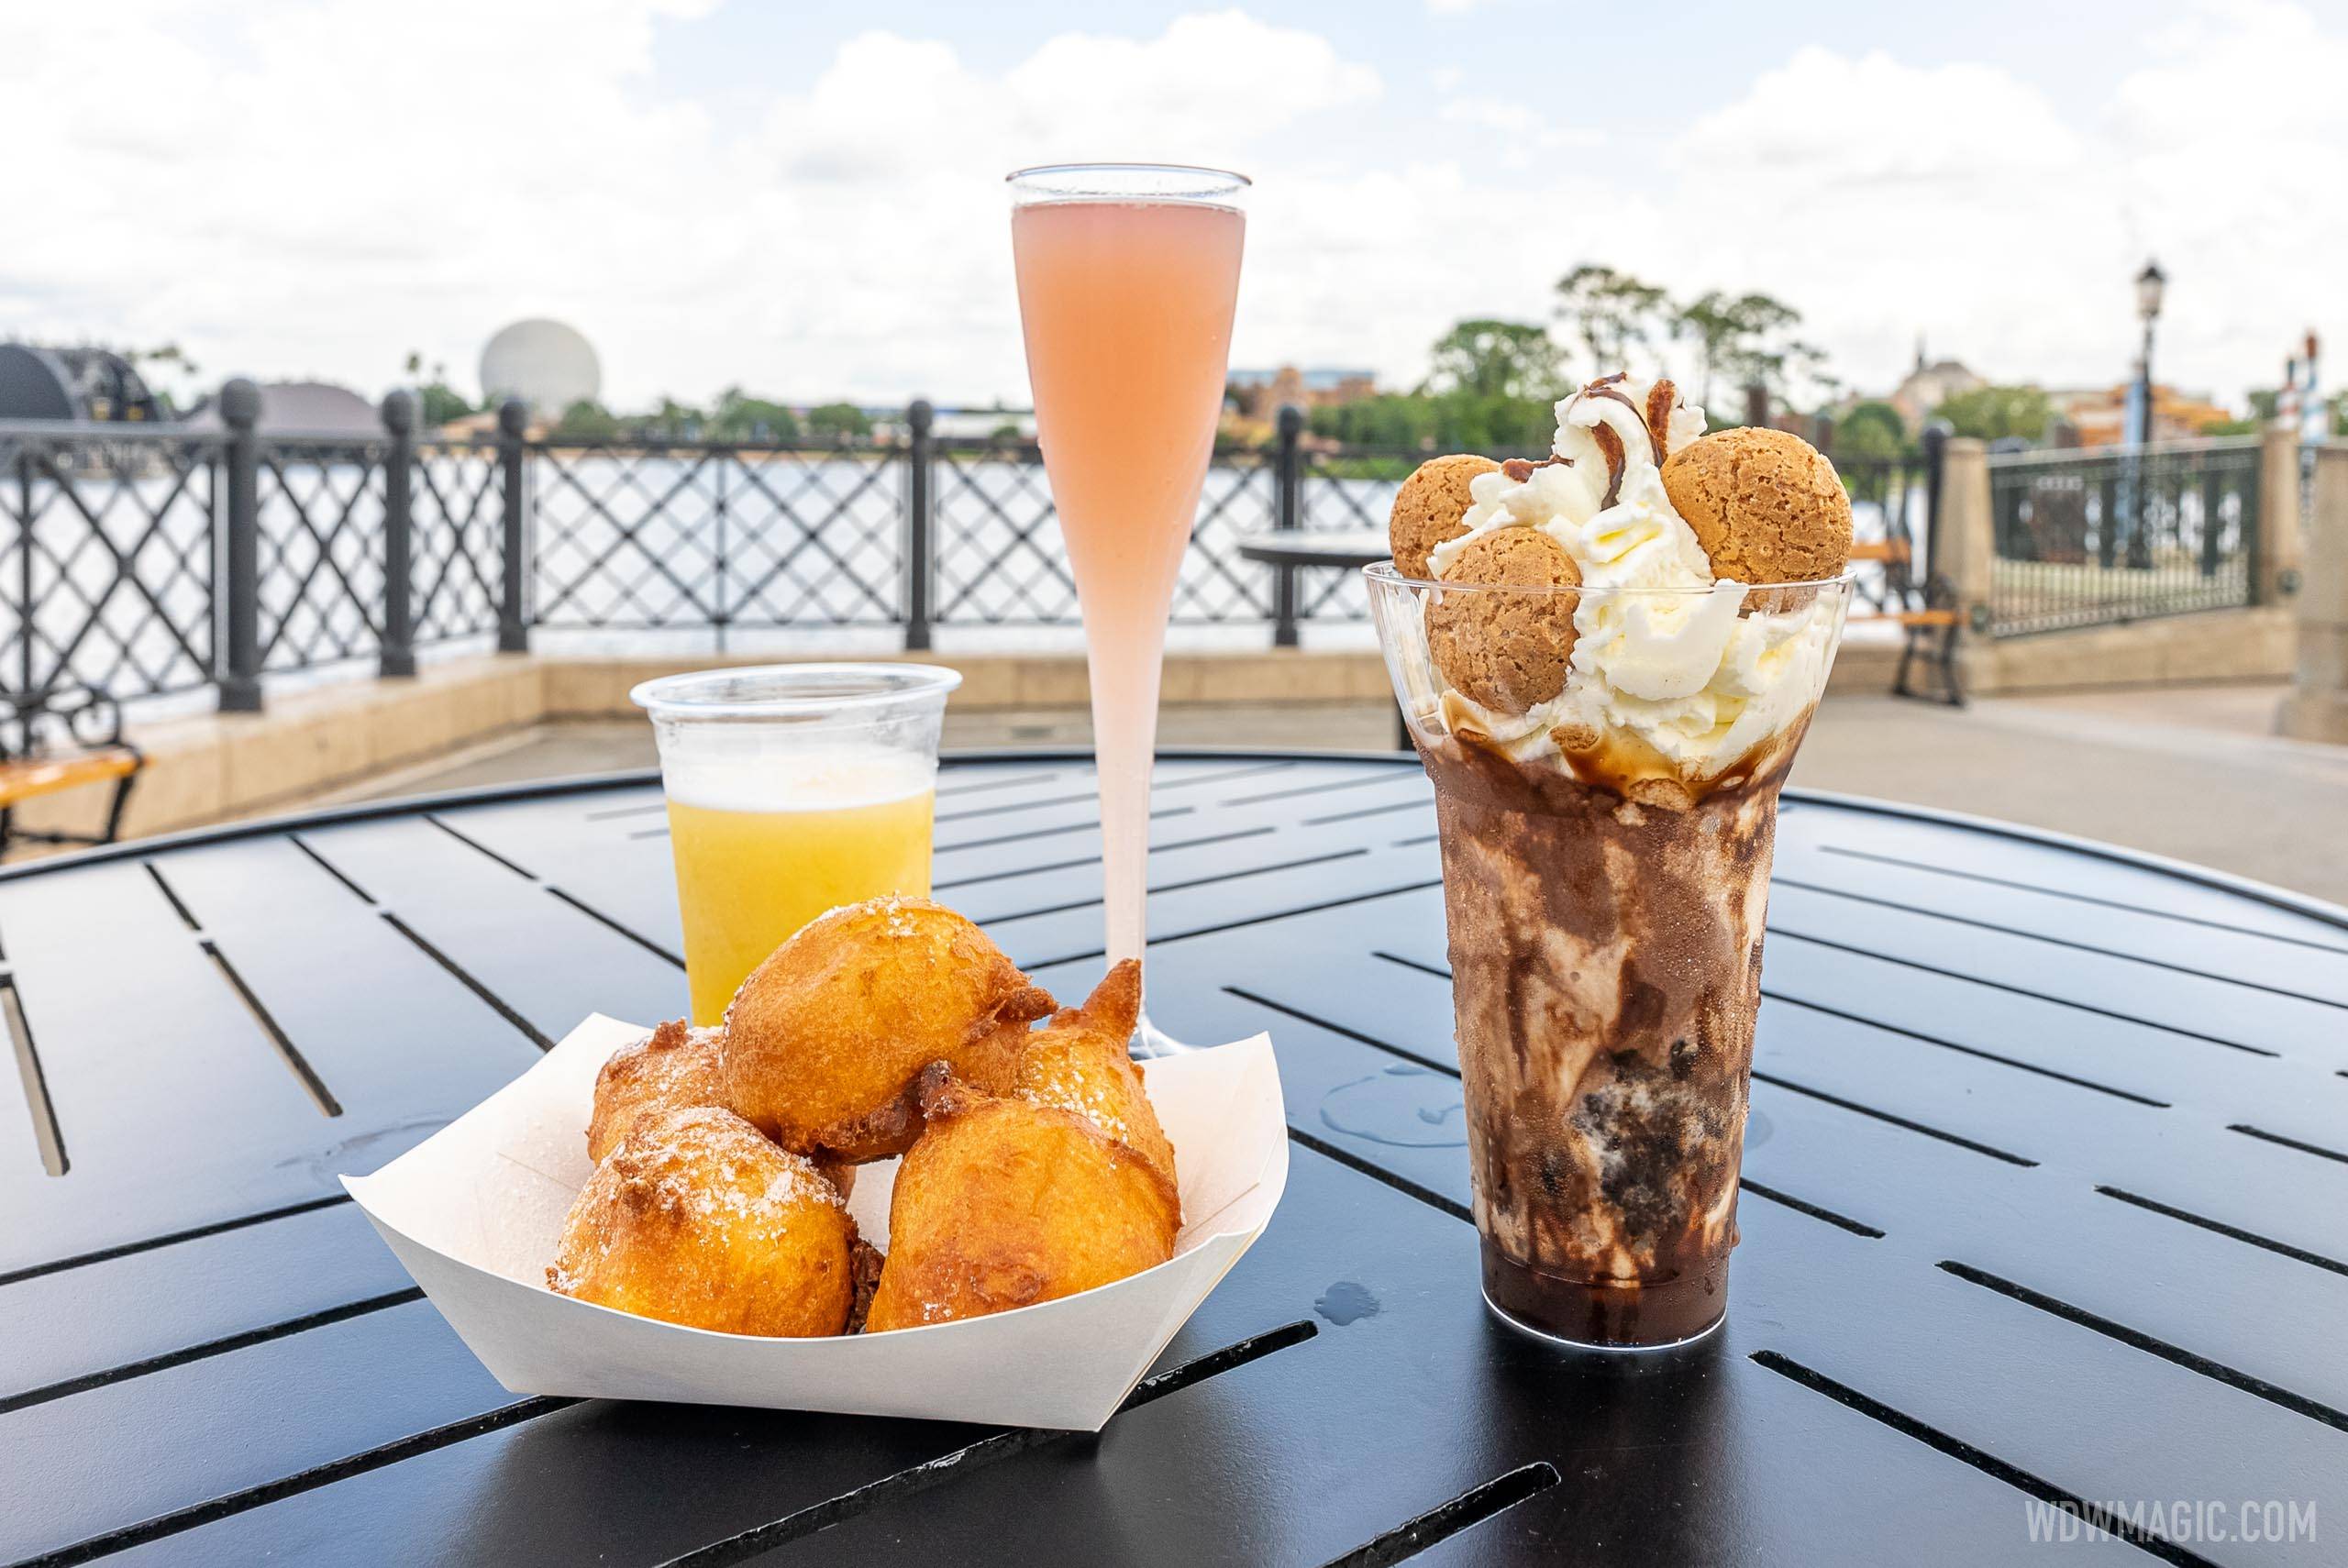 Gelateria Toscana will be another fan favorite stop-off along EPCOT'S World Showcase promenade